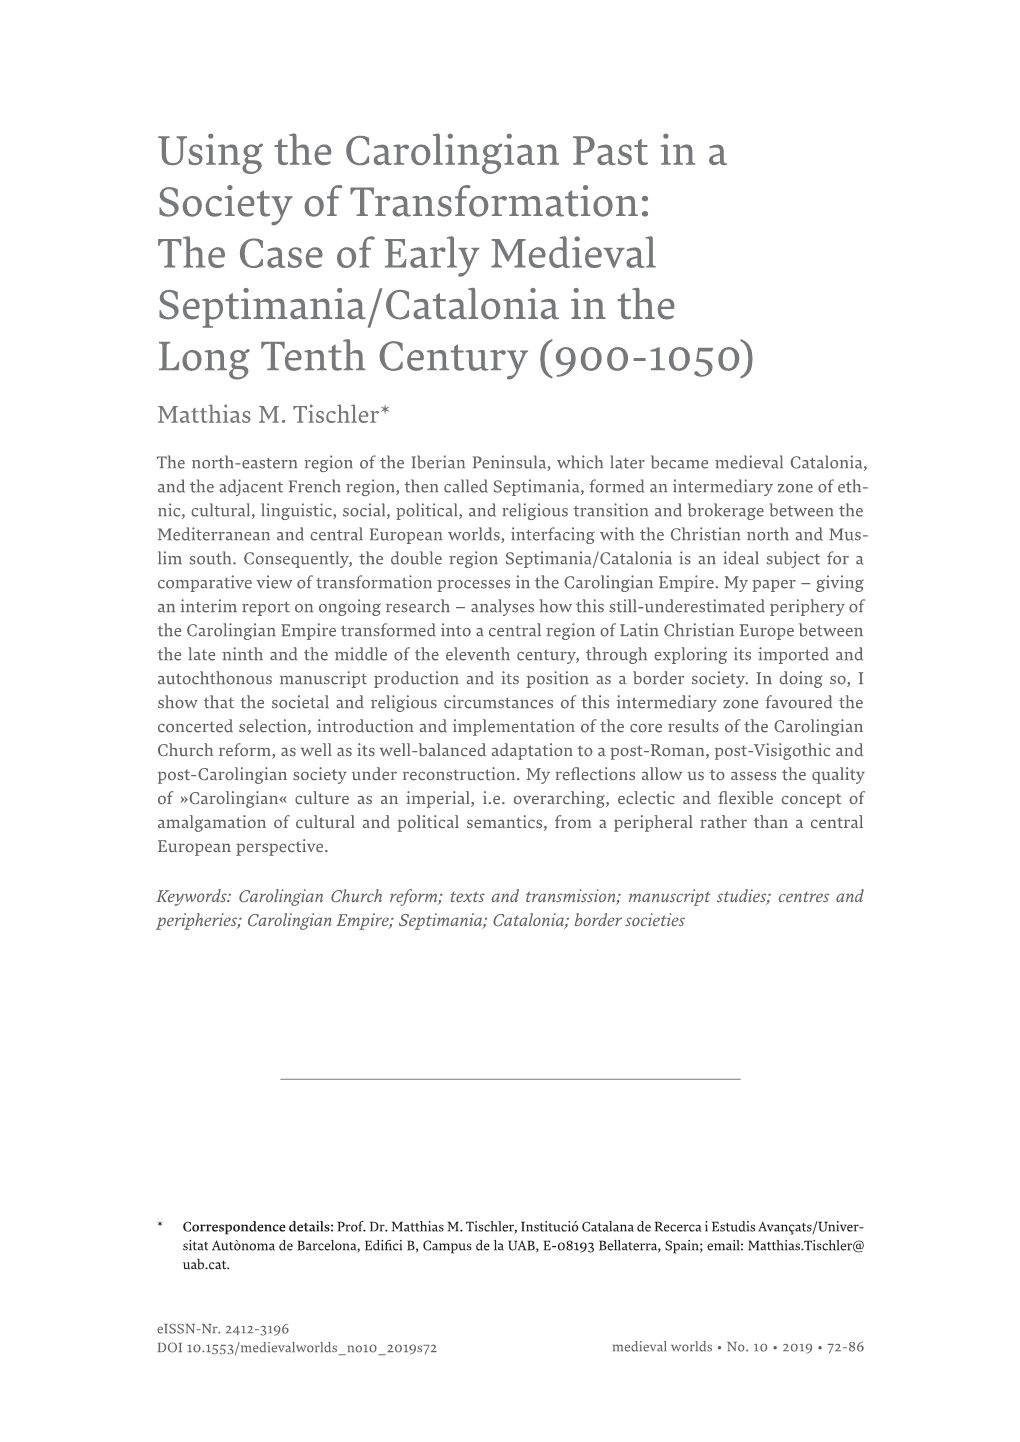 Using the Carolingian Past in a Society of Transformation: the Case of Early Medieval Septimania/Catalonia in the Long Tenth Century (900-1050)